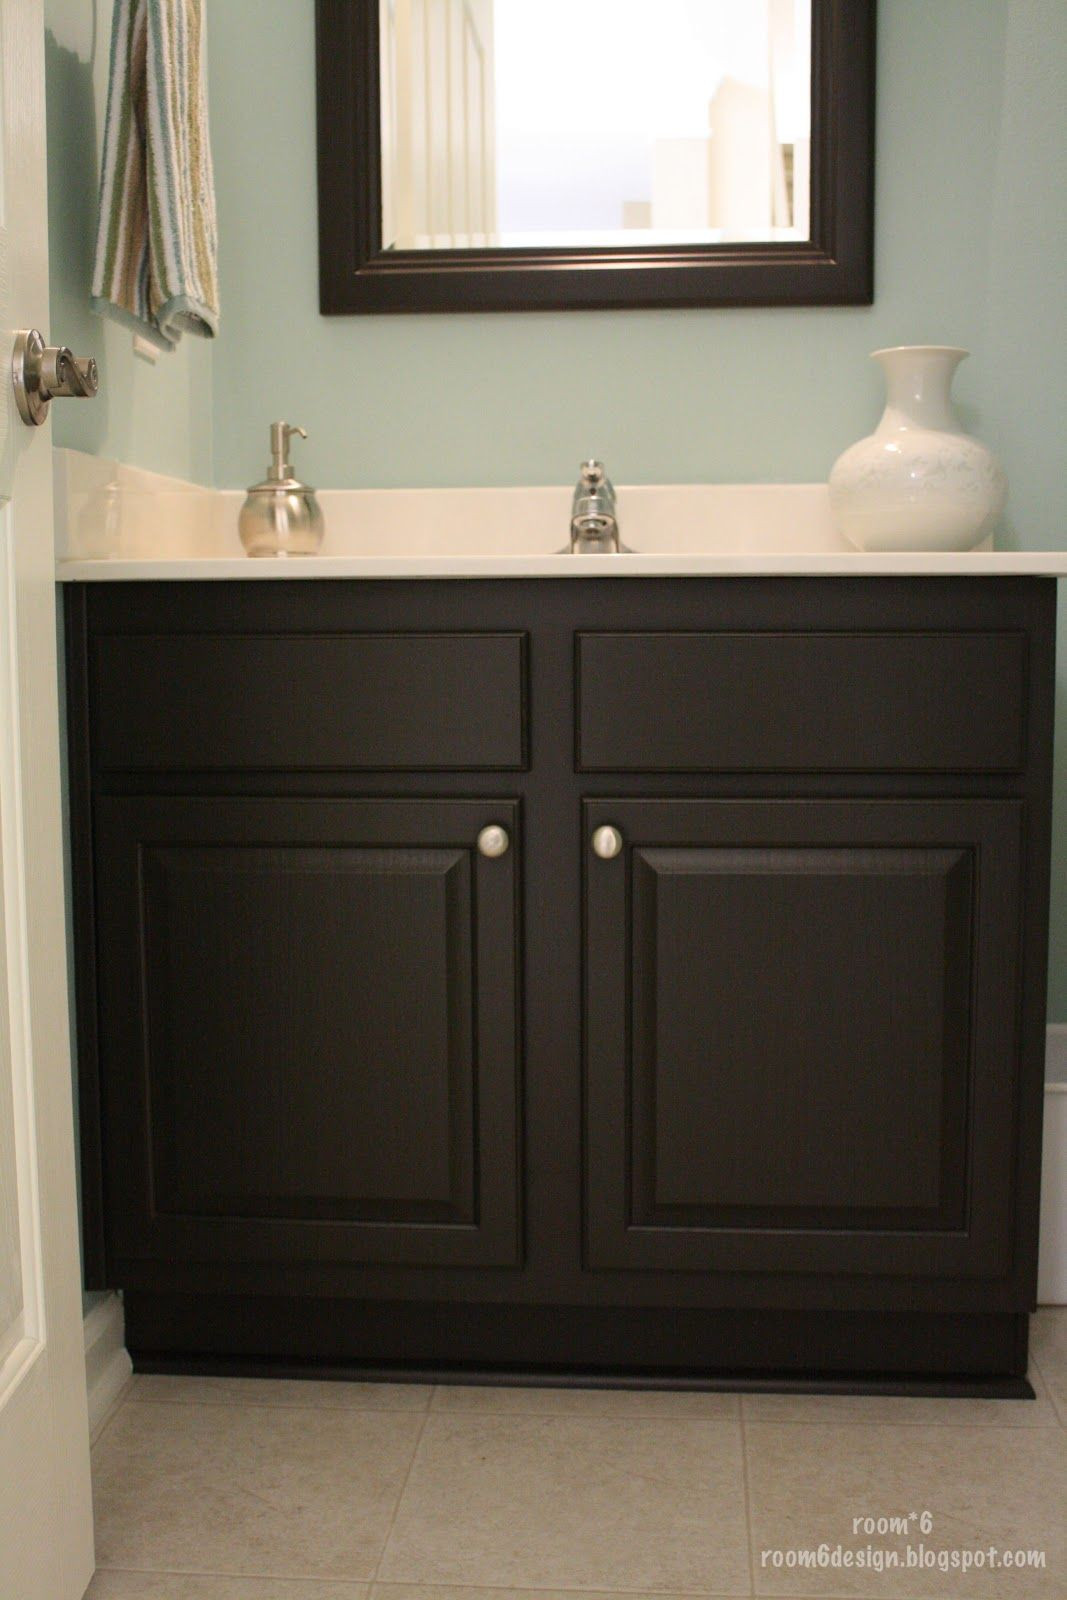 Paint Bathroom Cabinets
 Oh I want to paint our bathroom cabinet